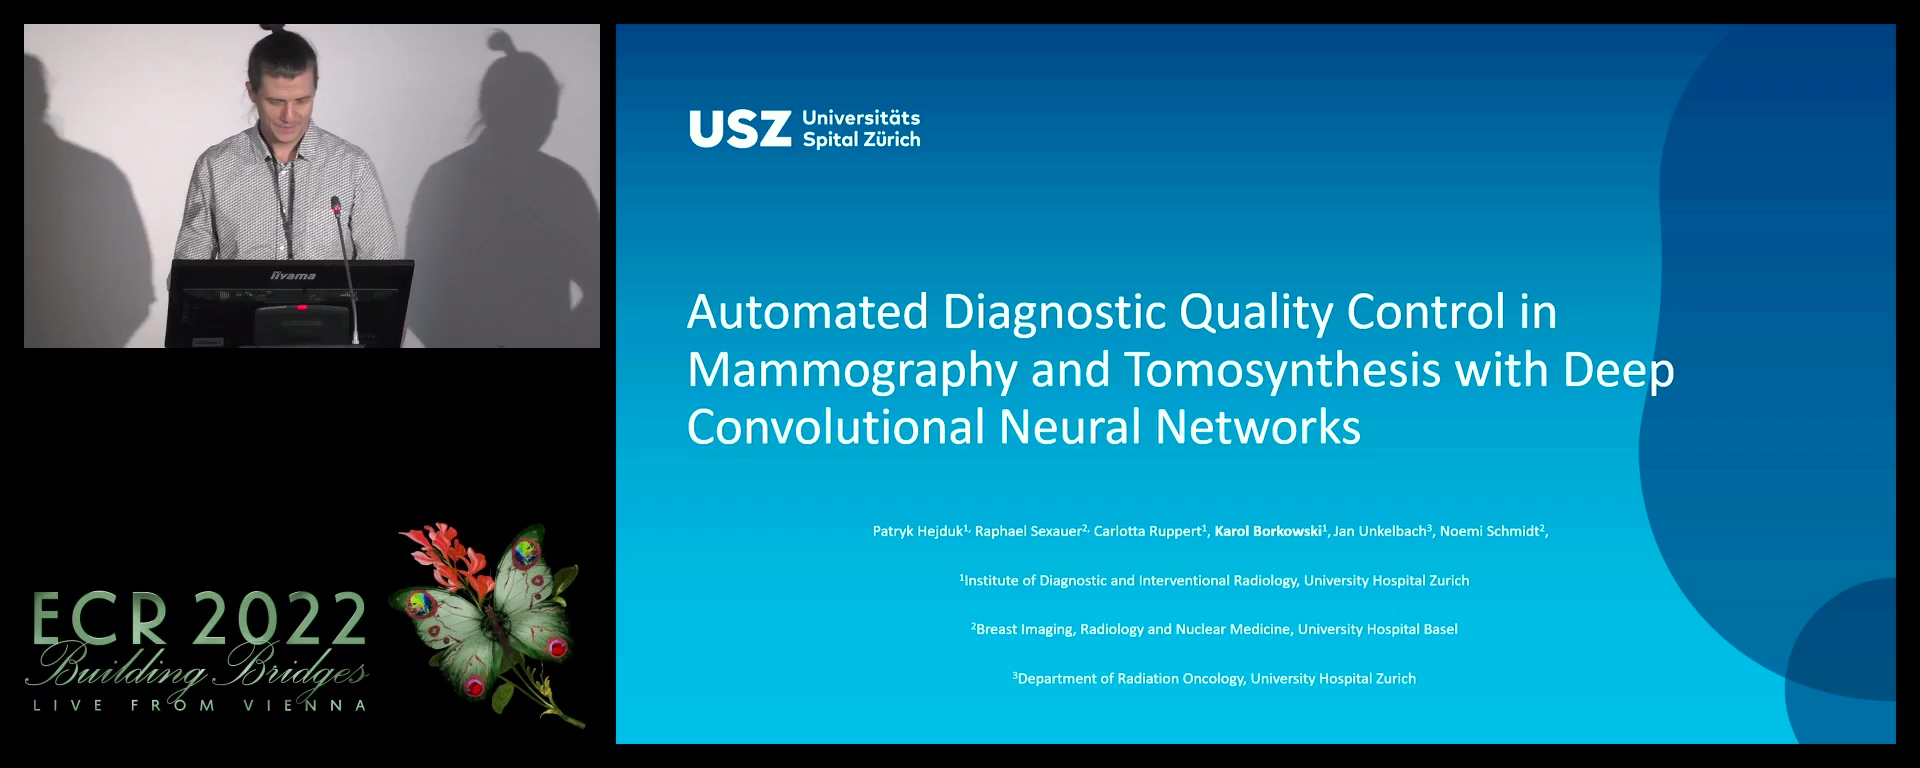 Automatic and standardised quality control of digital mammography and tomosynthesis with deep convolutional neural networks